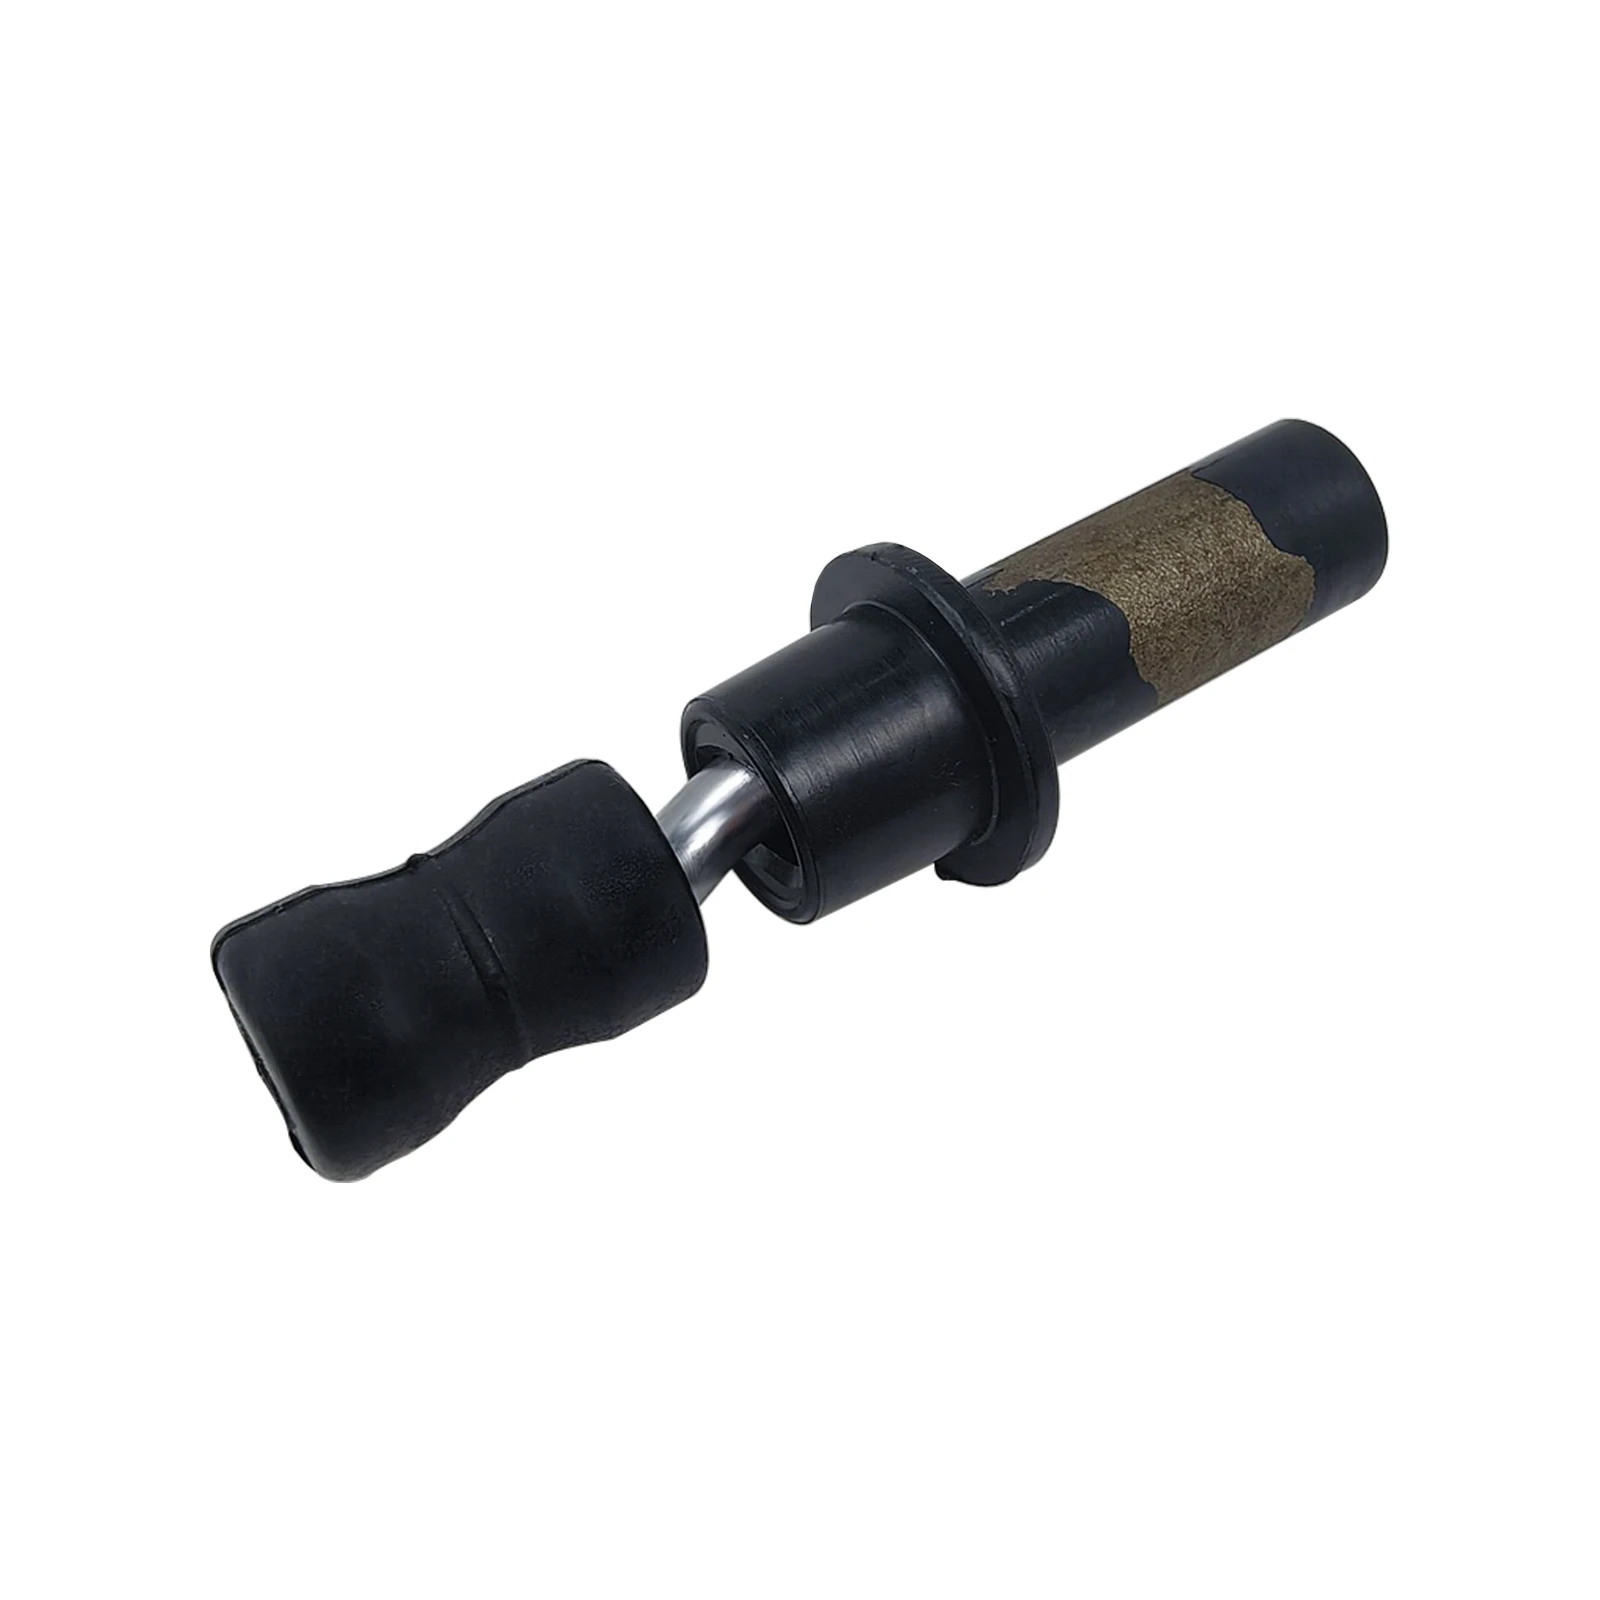 High Quality Water Pump Internal Accessories Screw Rods Are Used to Replace The Tnternal Accessories of The Water Pump